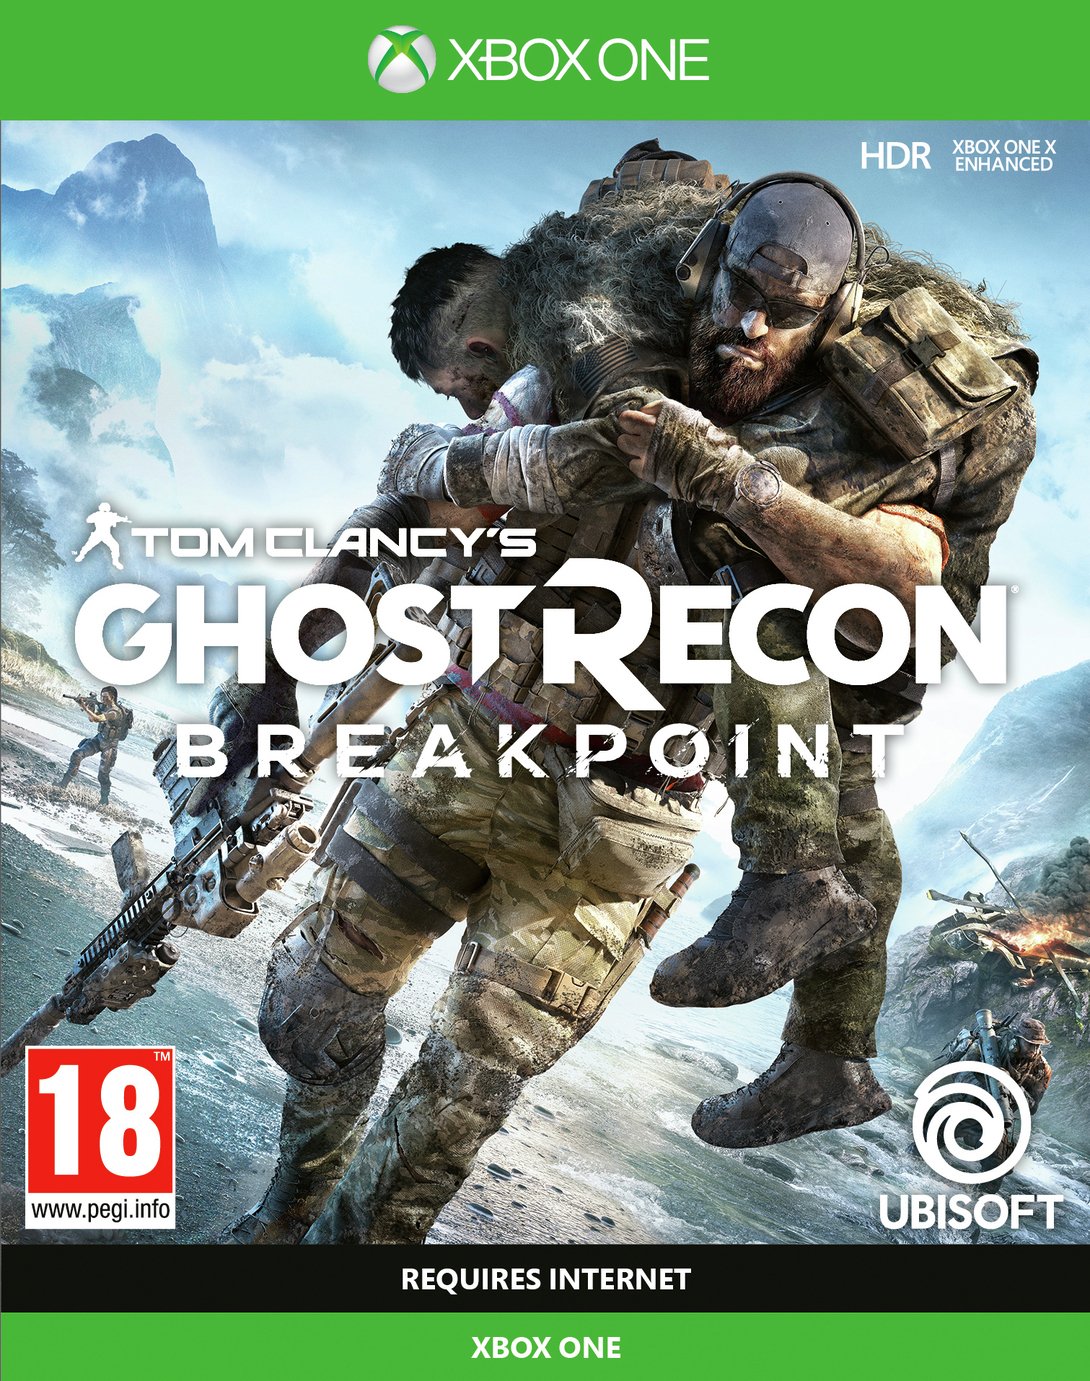 ghost recon breakpoint xbox one digital